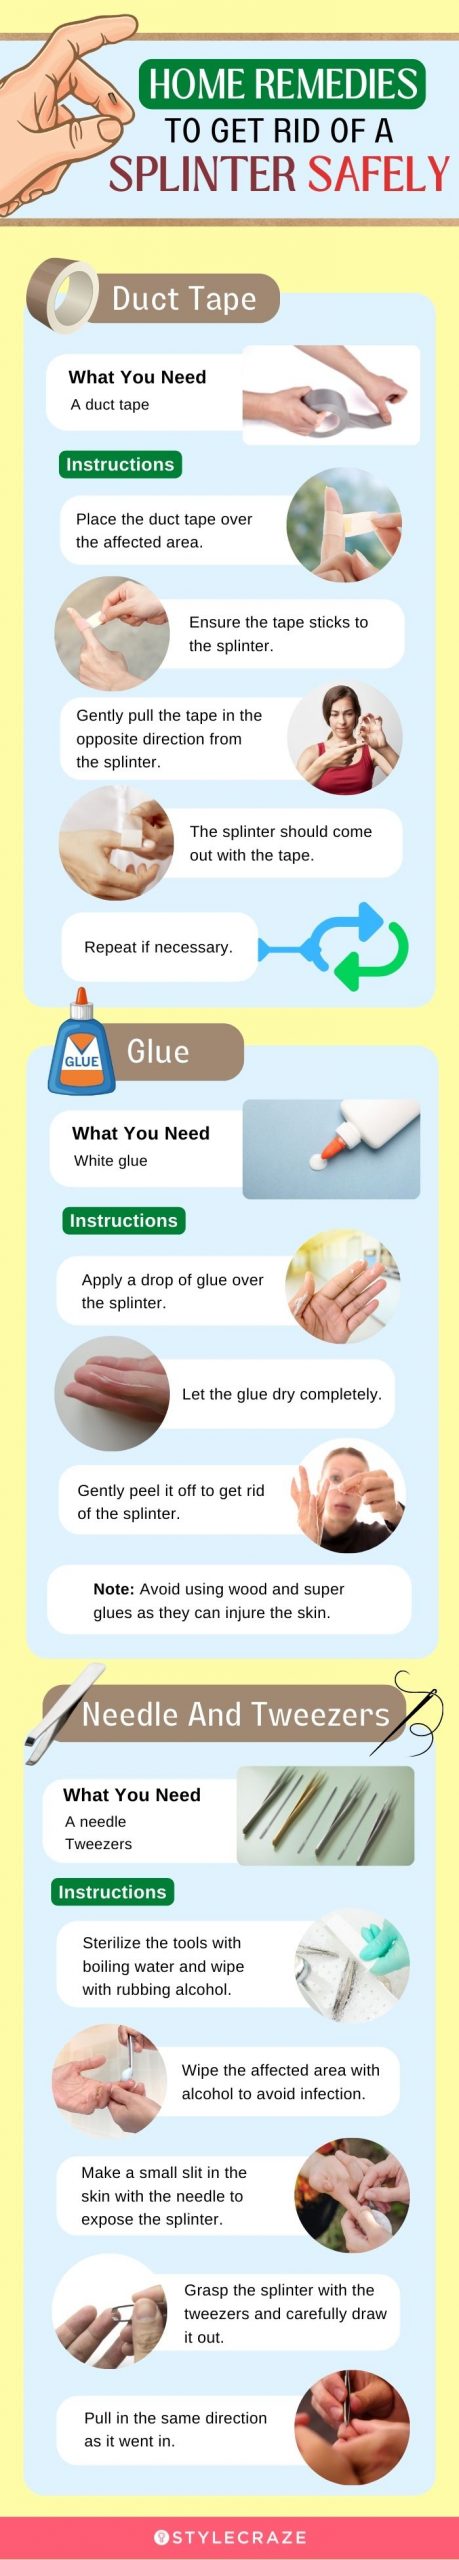 home remedies to get rid of a splinter safely (infographic)